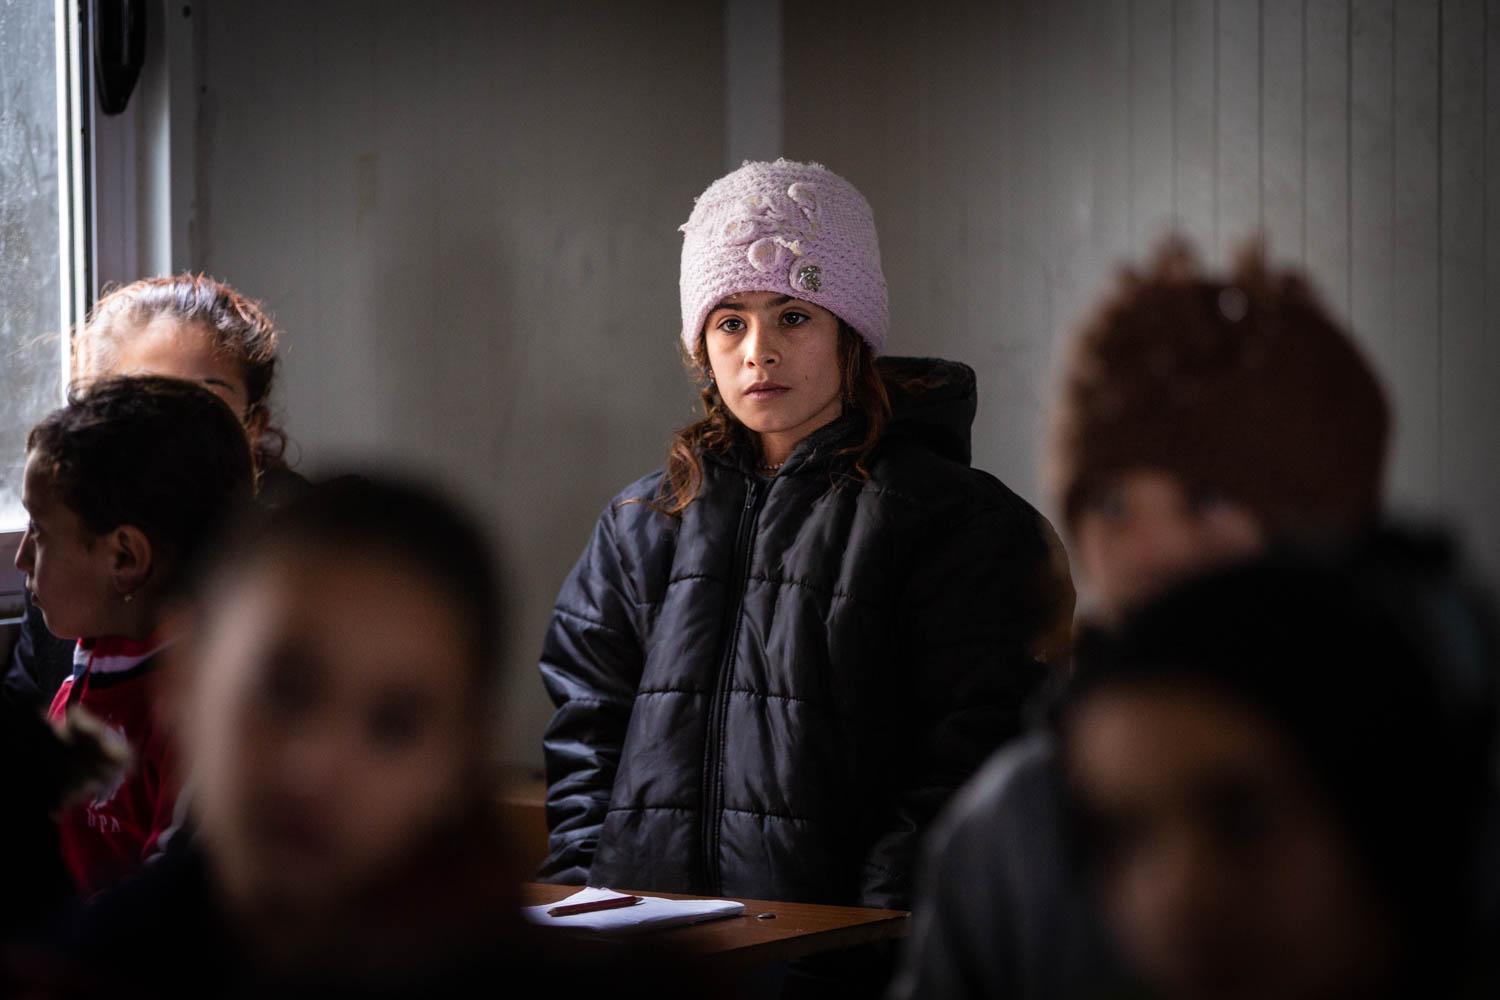 Education Whilst Displaced - Sahara, age 8, stands during a lesson inside of a...